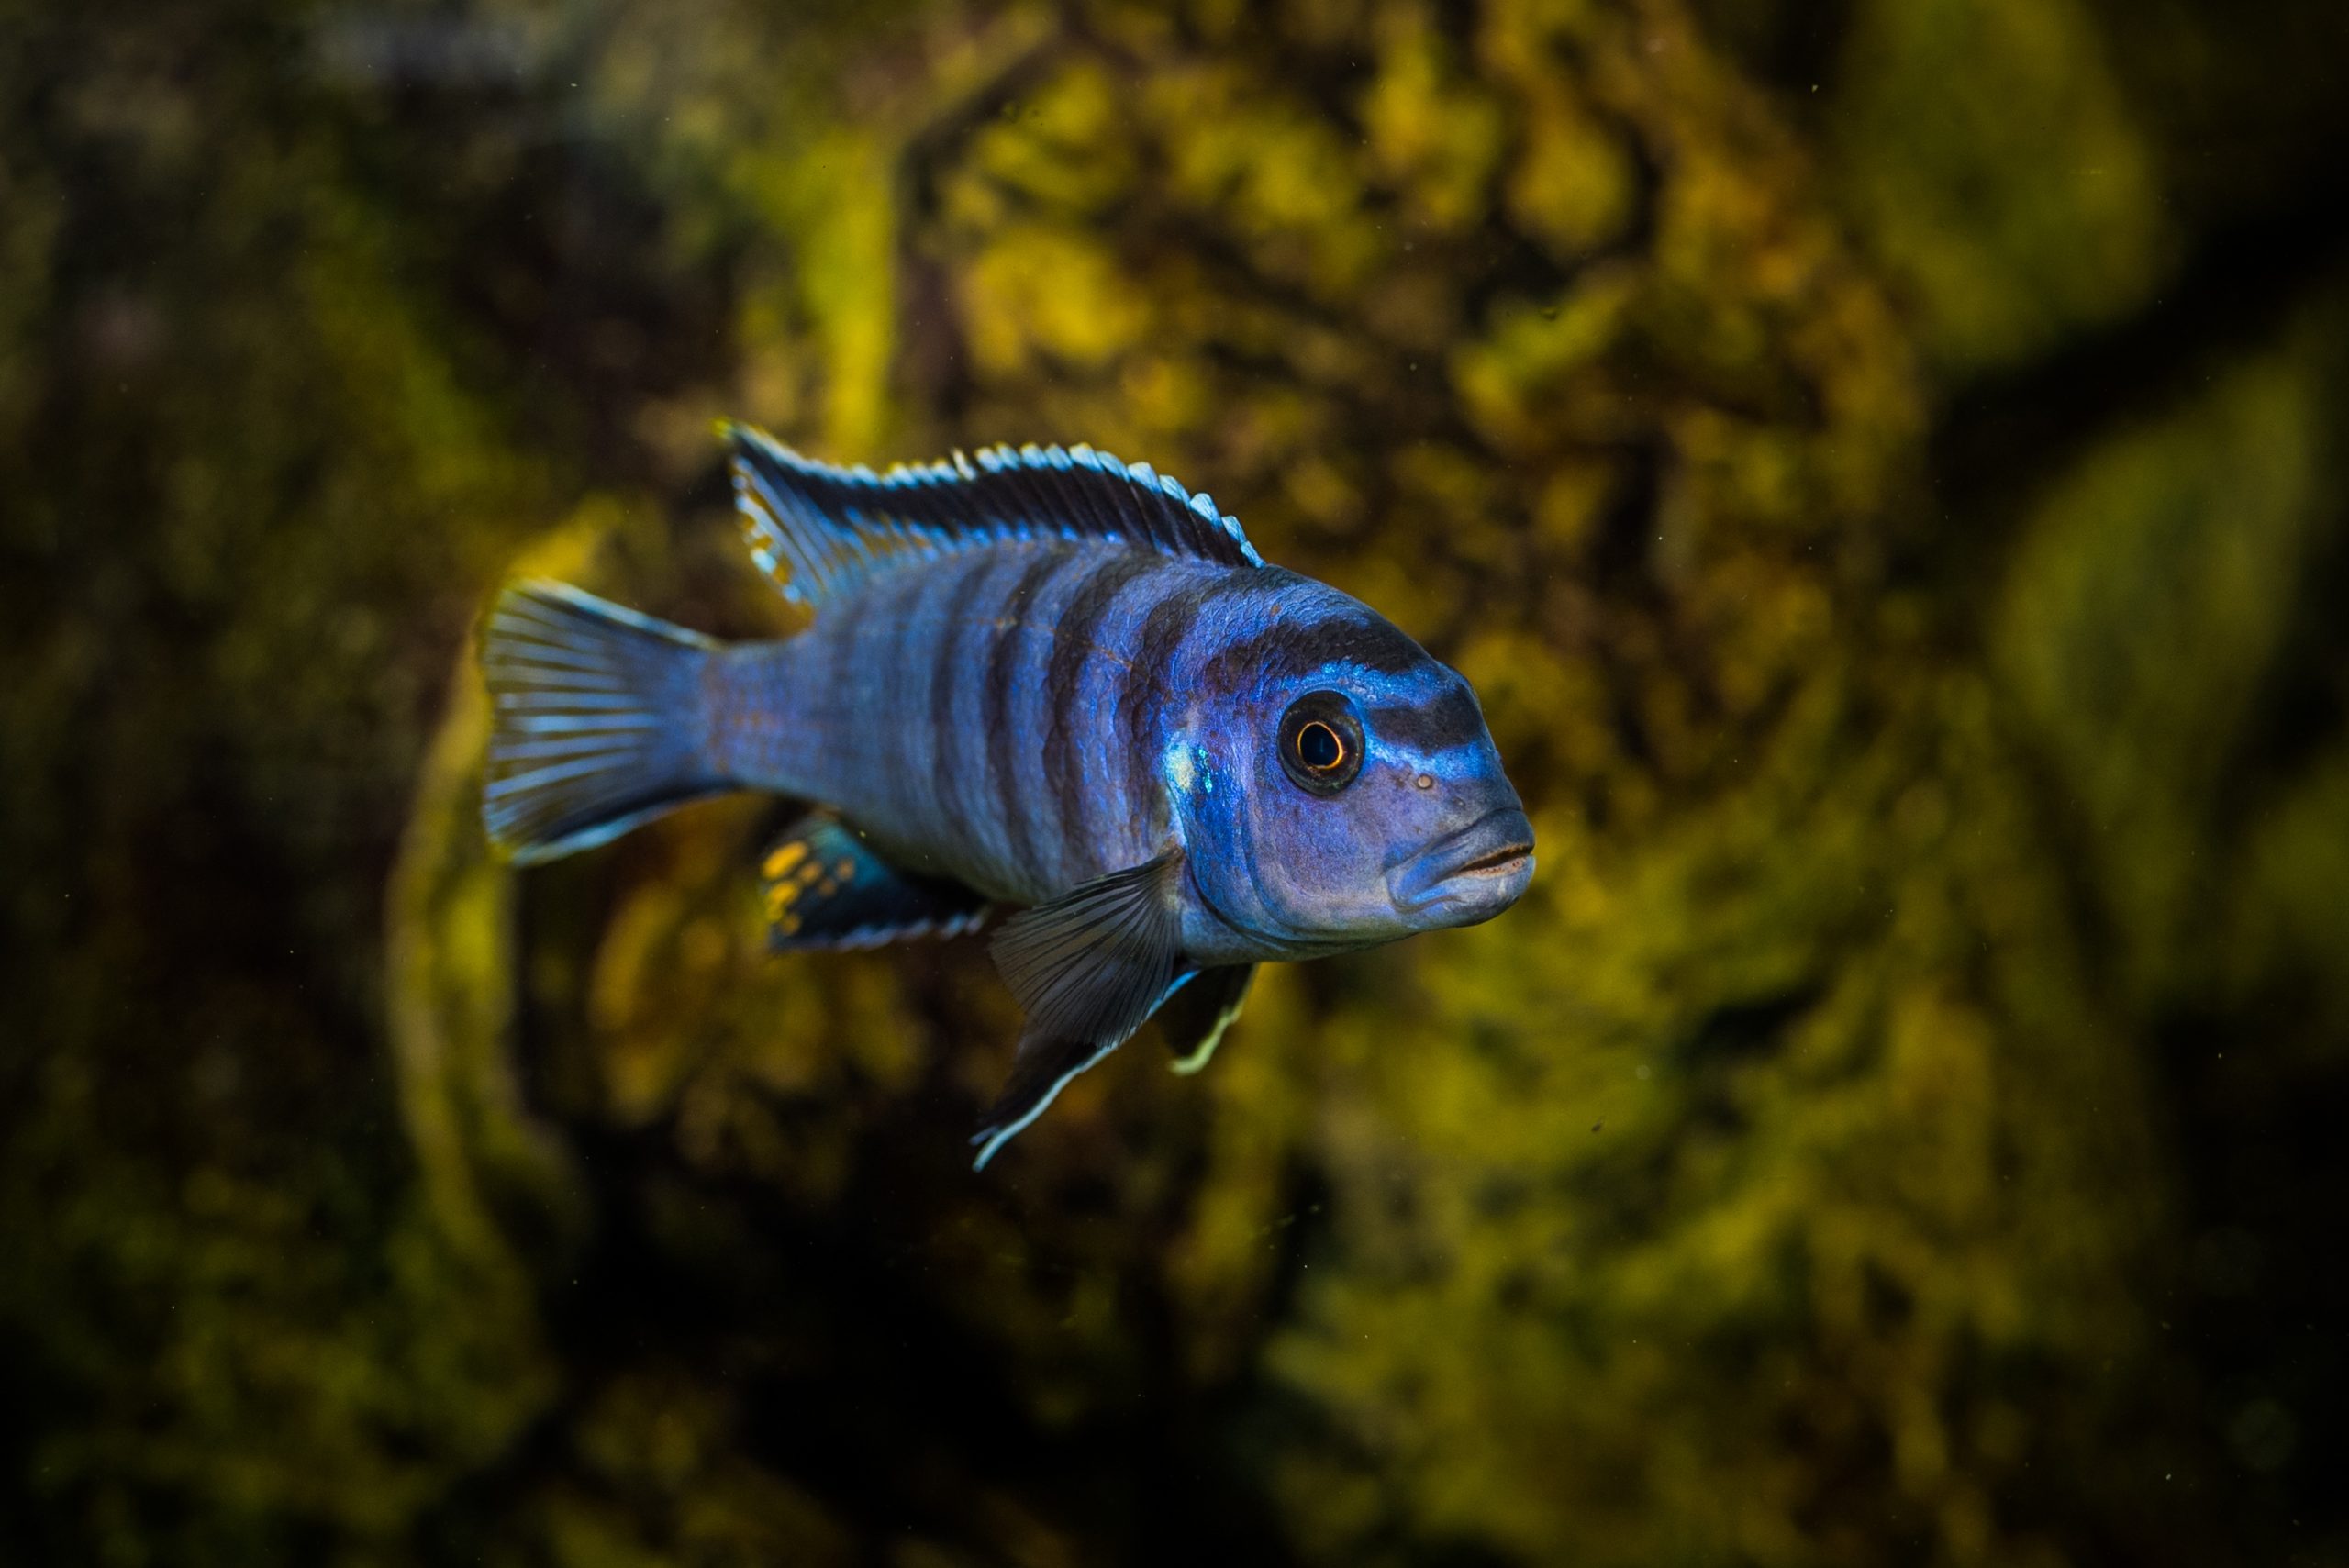 Selective shot of the aquarium blue with black patterns Cichlidae fish